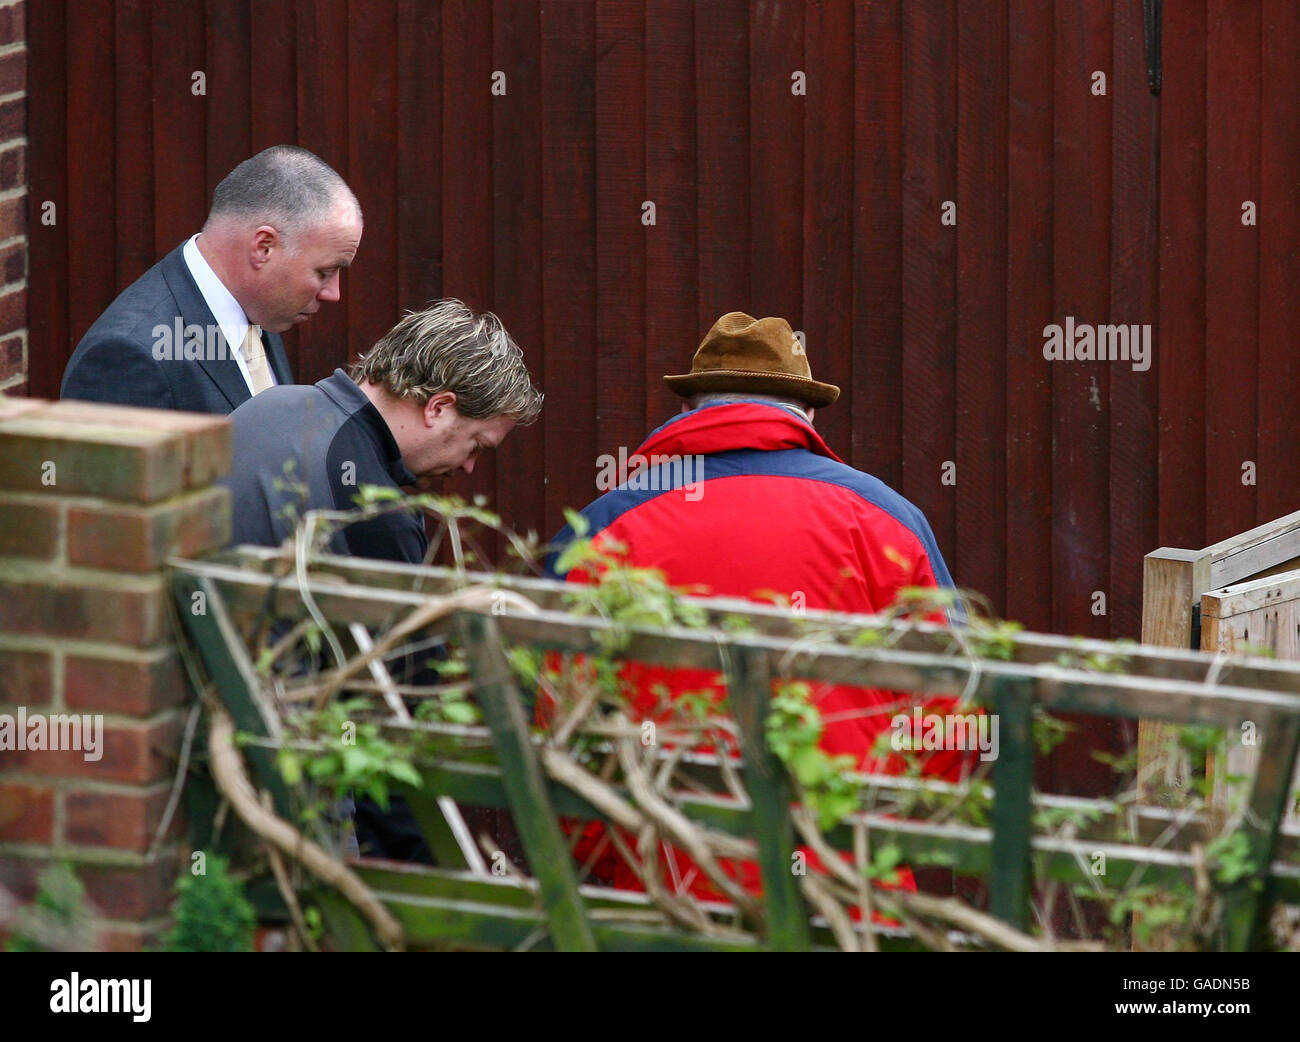 Ian McNicol (right) father of Dinah McNicol, accompanied by an unnamed relative (middle) and a senior police officer (left), visits the scene in the back garden at the former home of Peter Tobin in Margate, Kent, where the body of Dinah is thought to have been found. Stock Photo